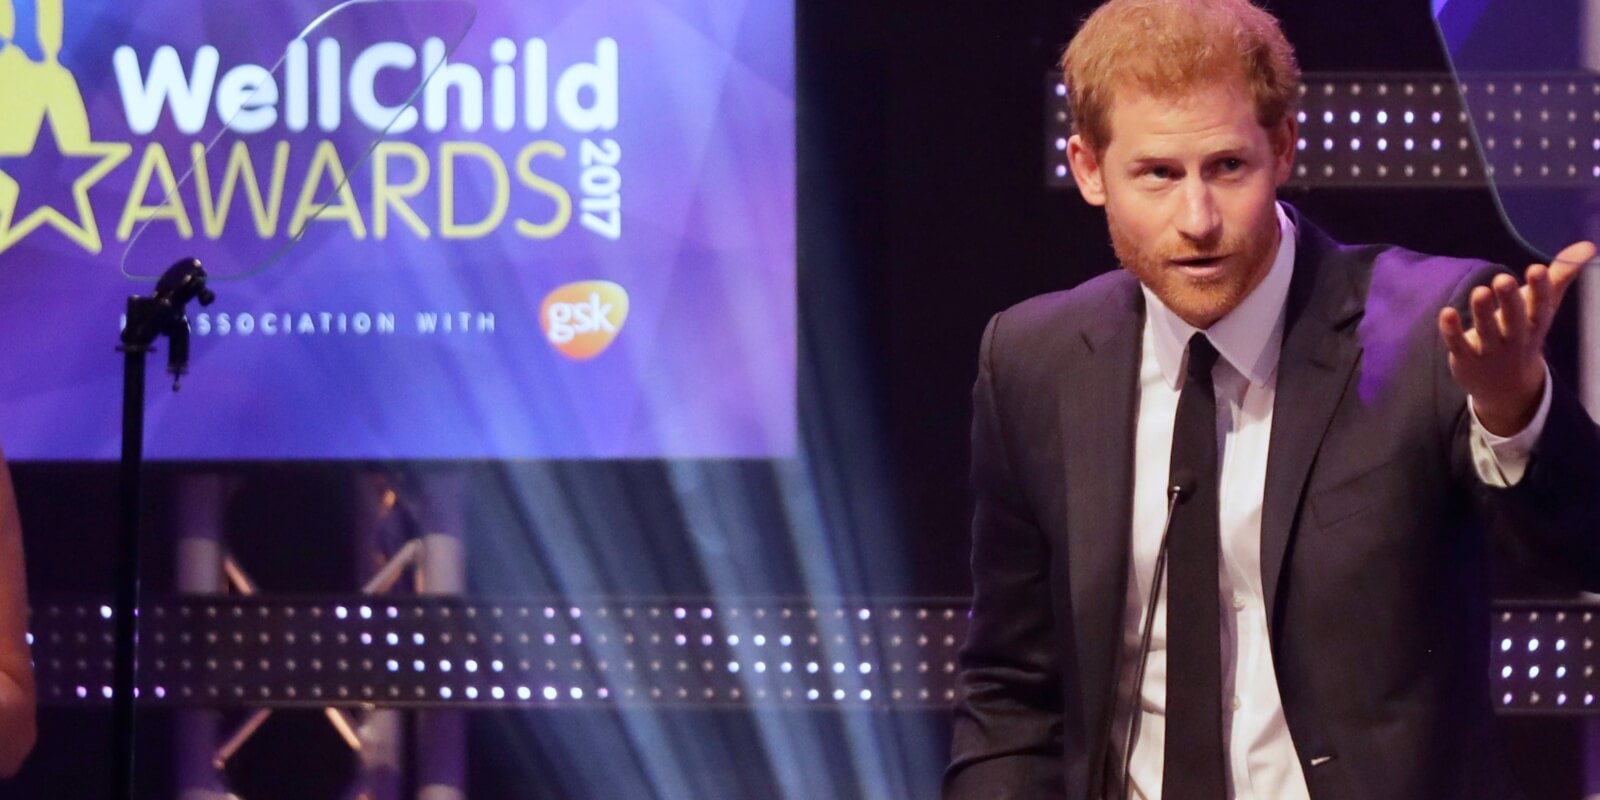 Prince Harry delivers a speech at the WellChild Awards in 2017.